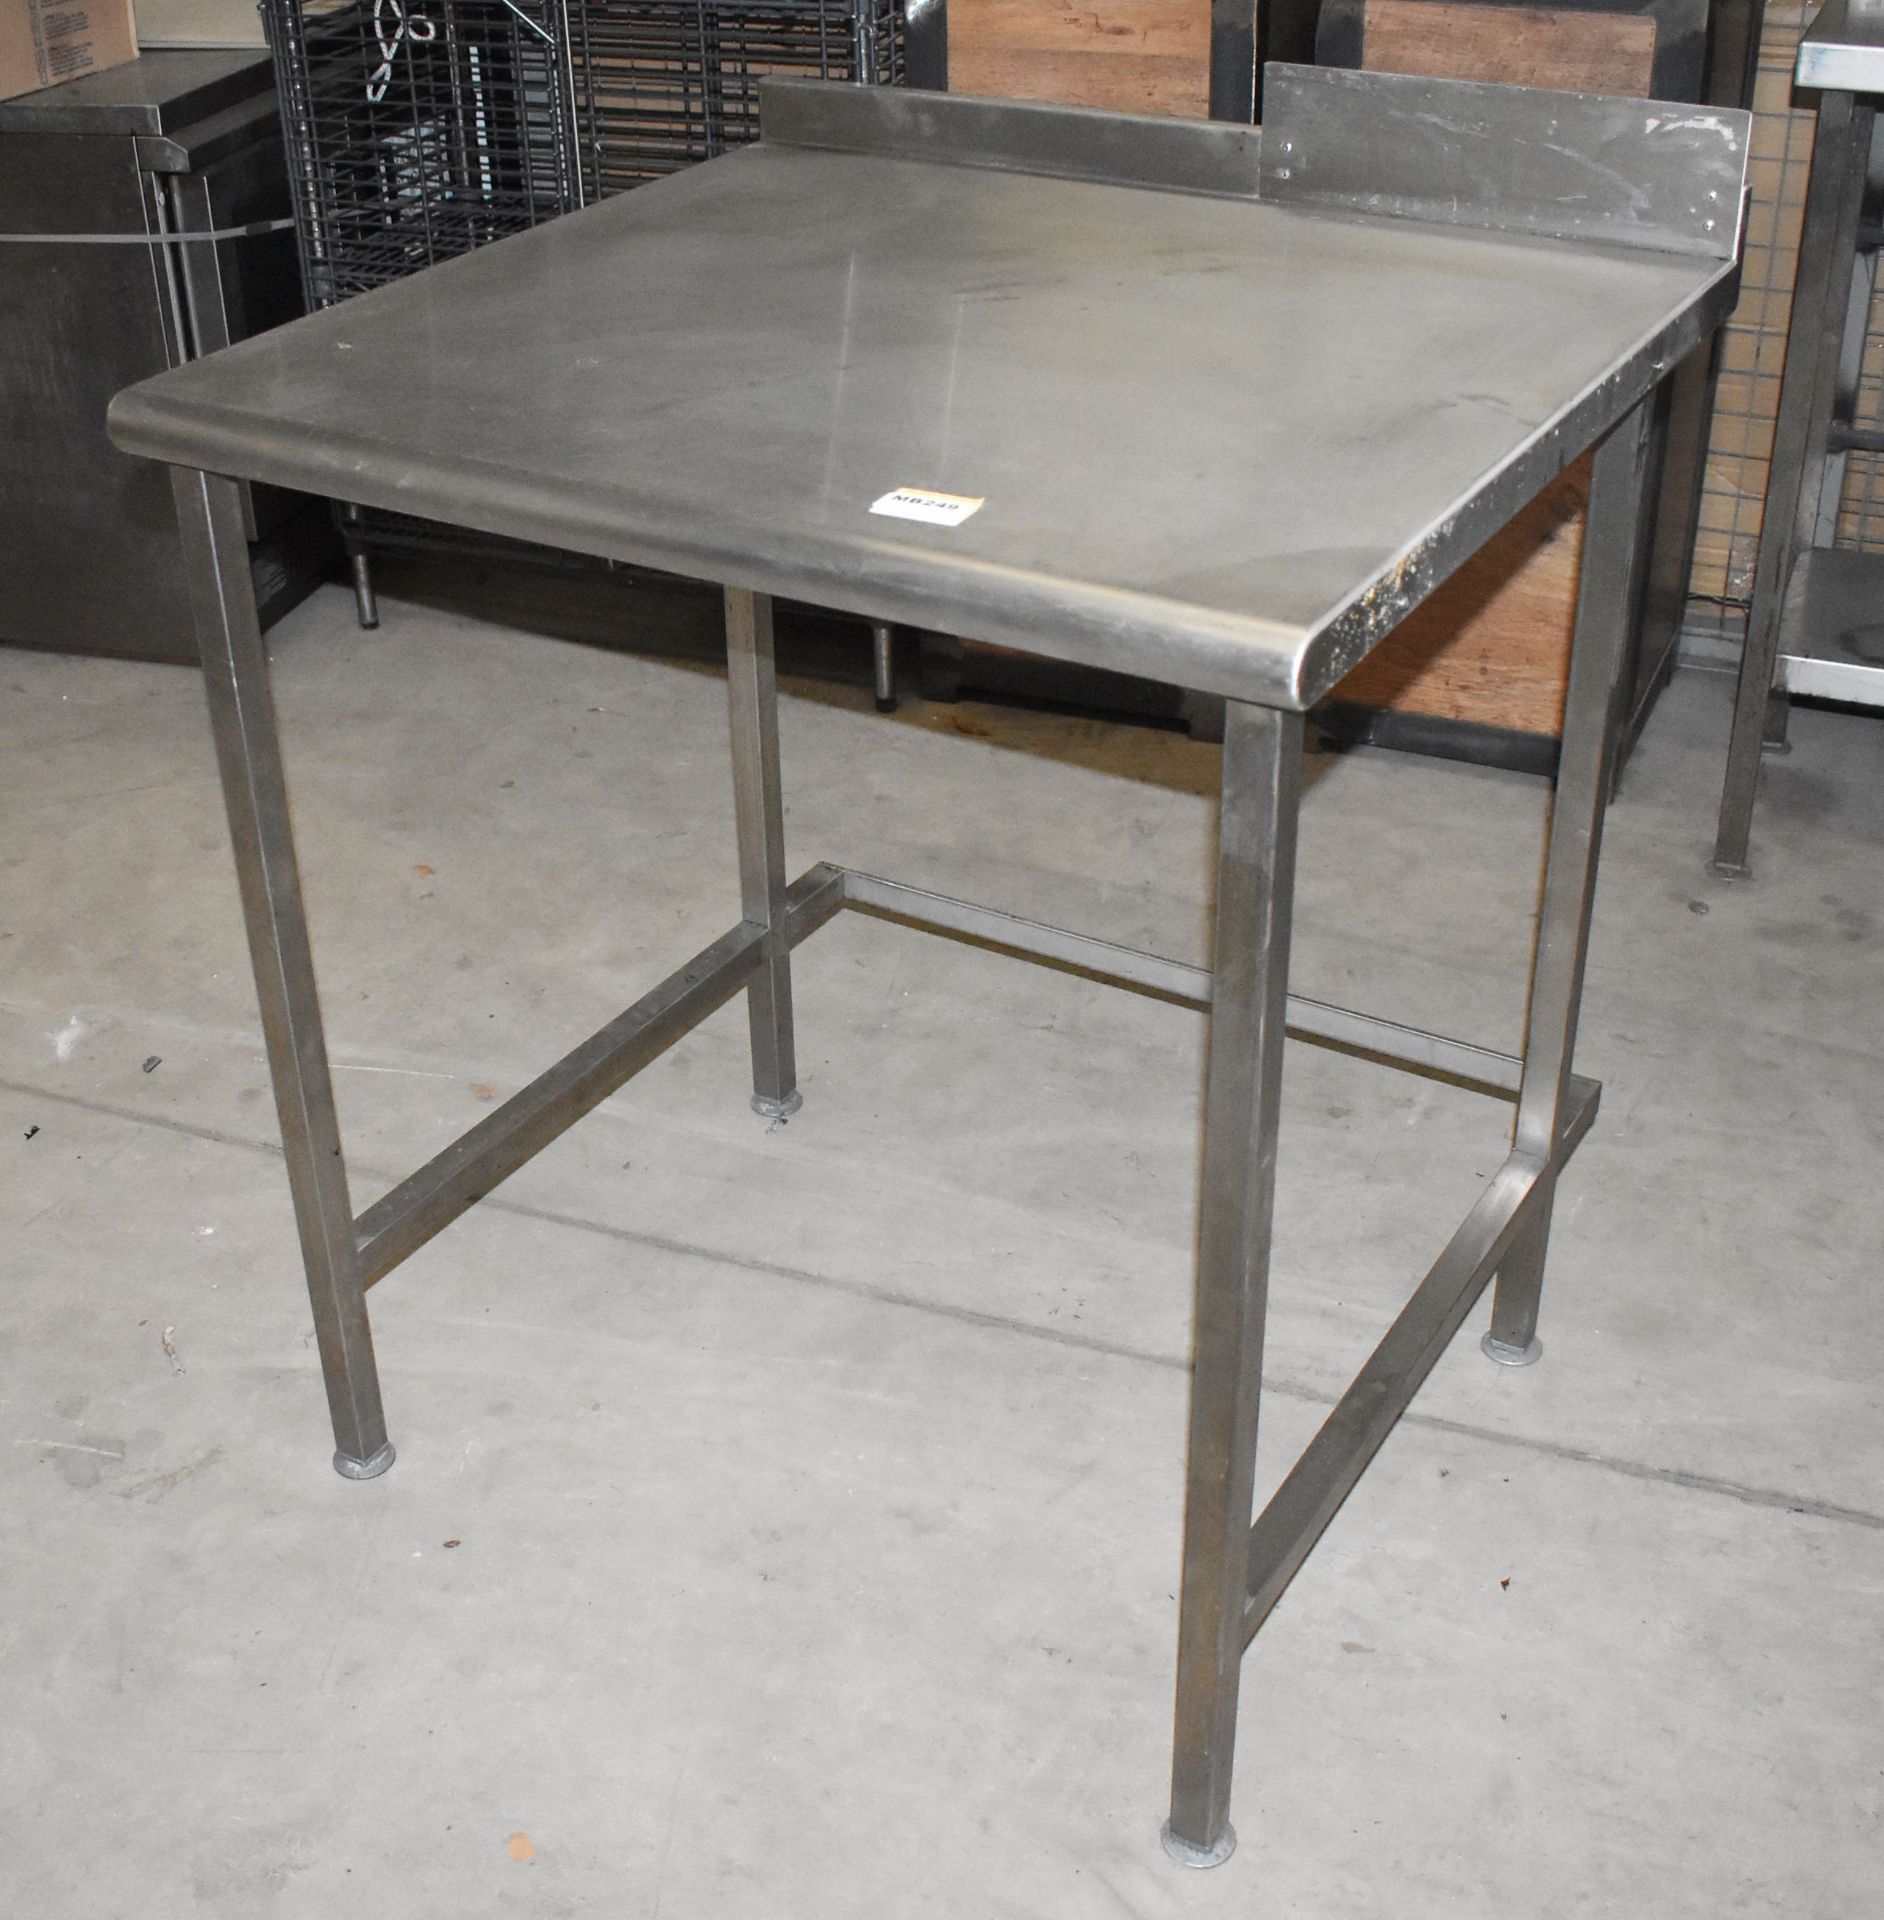 1 x Stainless Steel Prep Table With Upstand H89 x W80 x D75  cms - CL453 - Ref MB249 - Location: